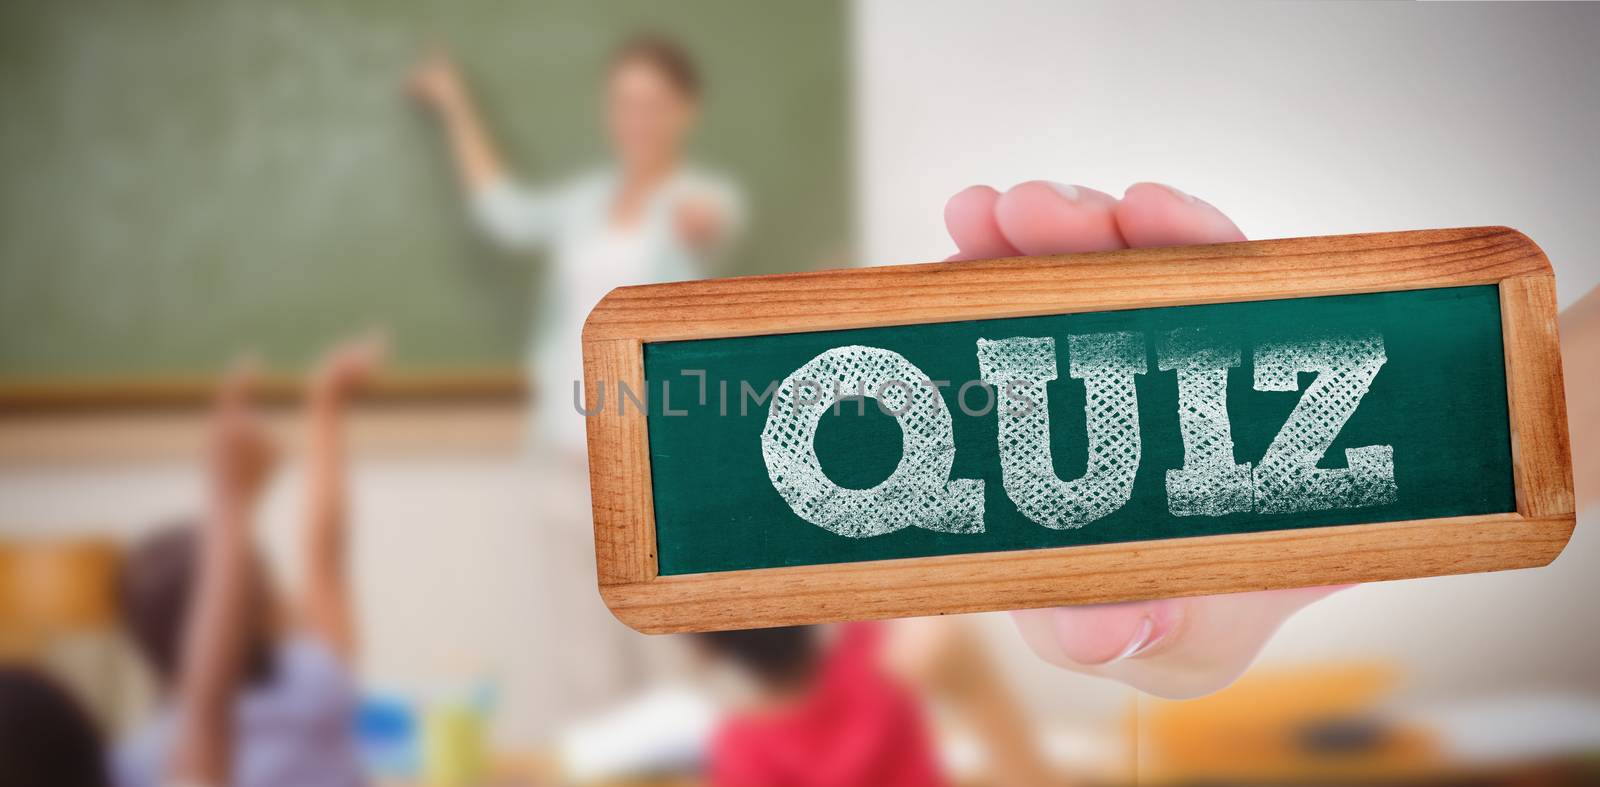 The word quiz and hand showing chalkboard against pupils raising their hands during class